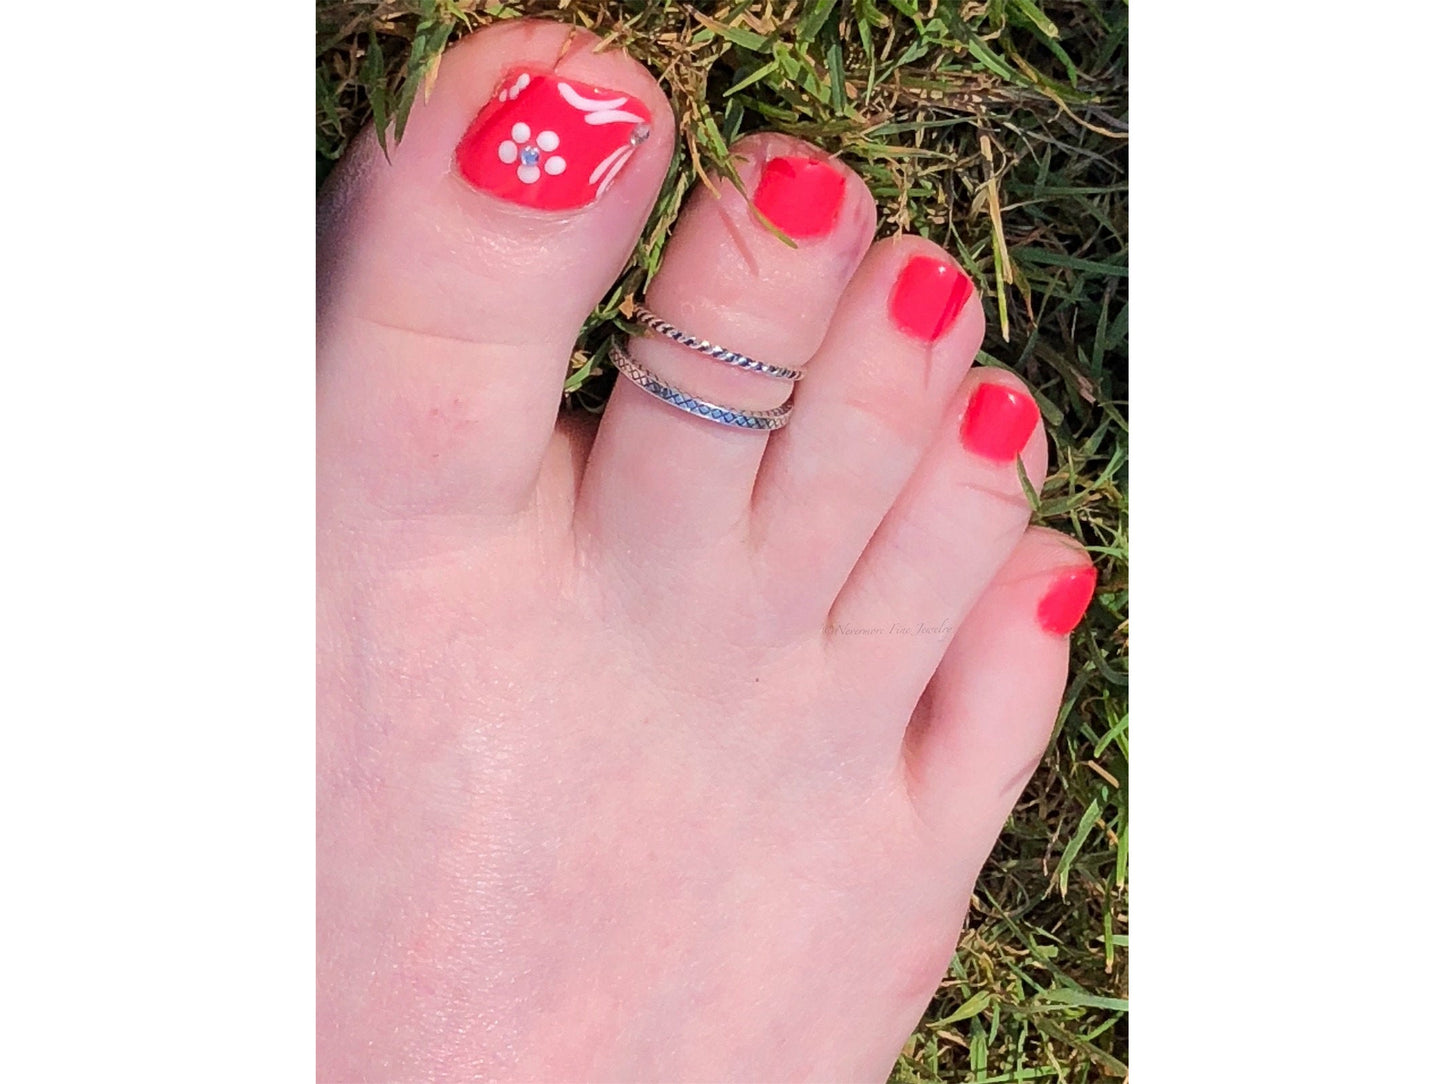 sterling-silver-toe-ring-silver-toe-ring-adjustable-toe-ring-boho-jewelry-simple-toe-ring-textured-toe-ring-beach-jewelry-toe-ring-simple